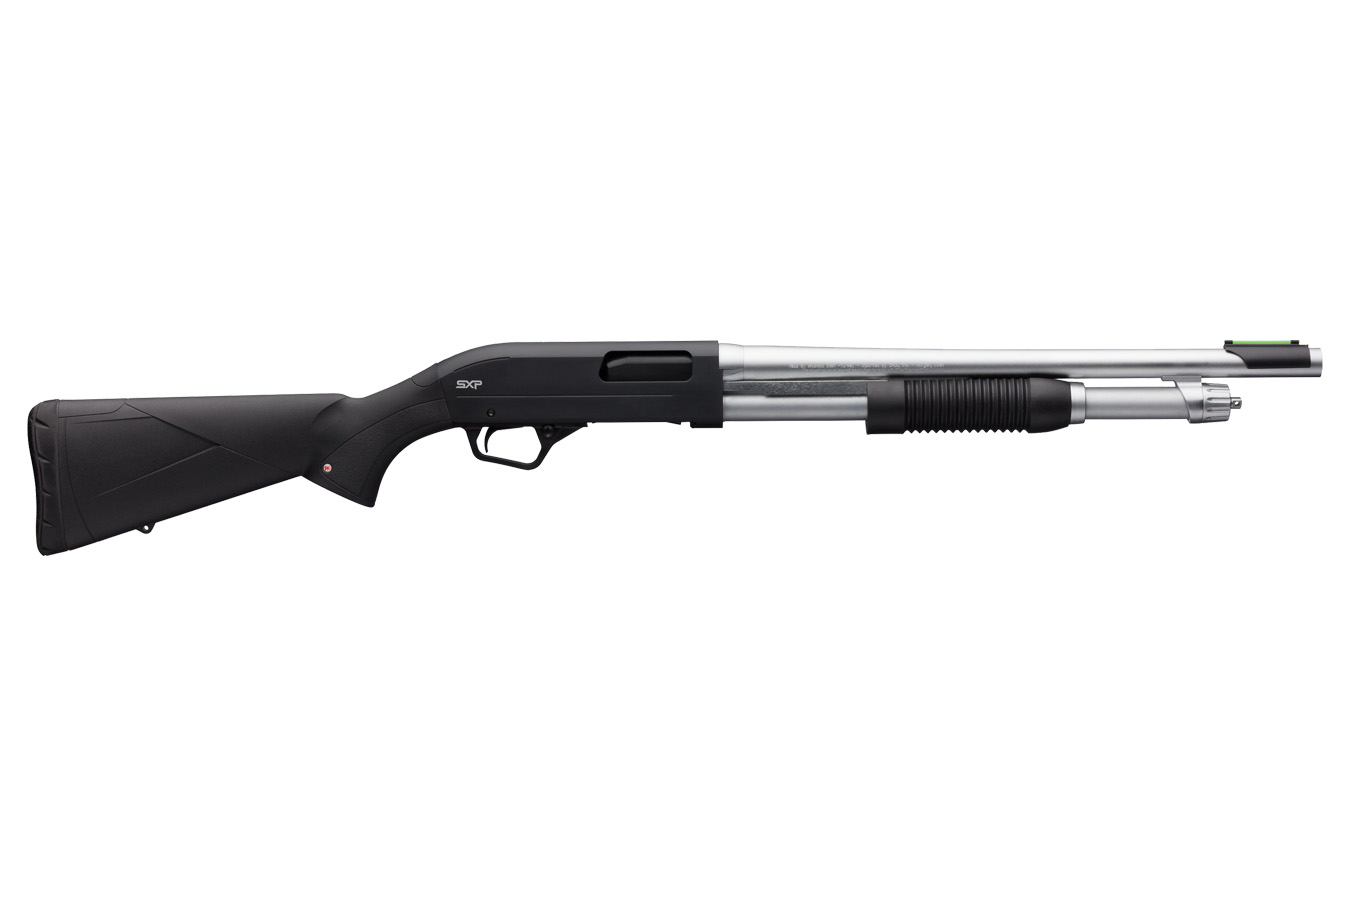 No. 9 Best Selling: WINCHESTER FIREARMS SXP MARINE DEFENDER 12 GA 18`` BBL